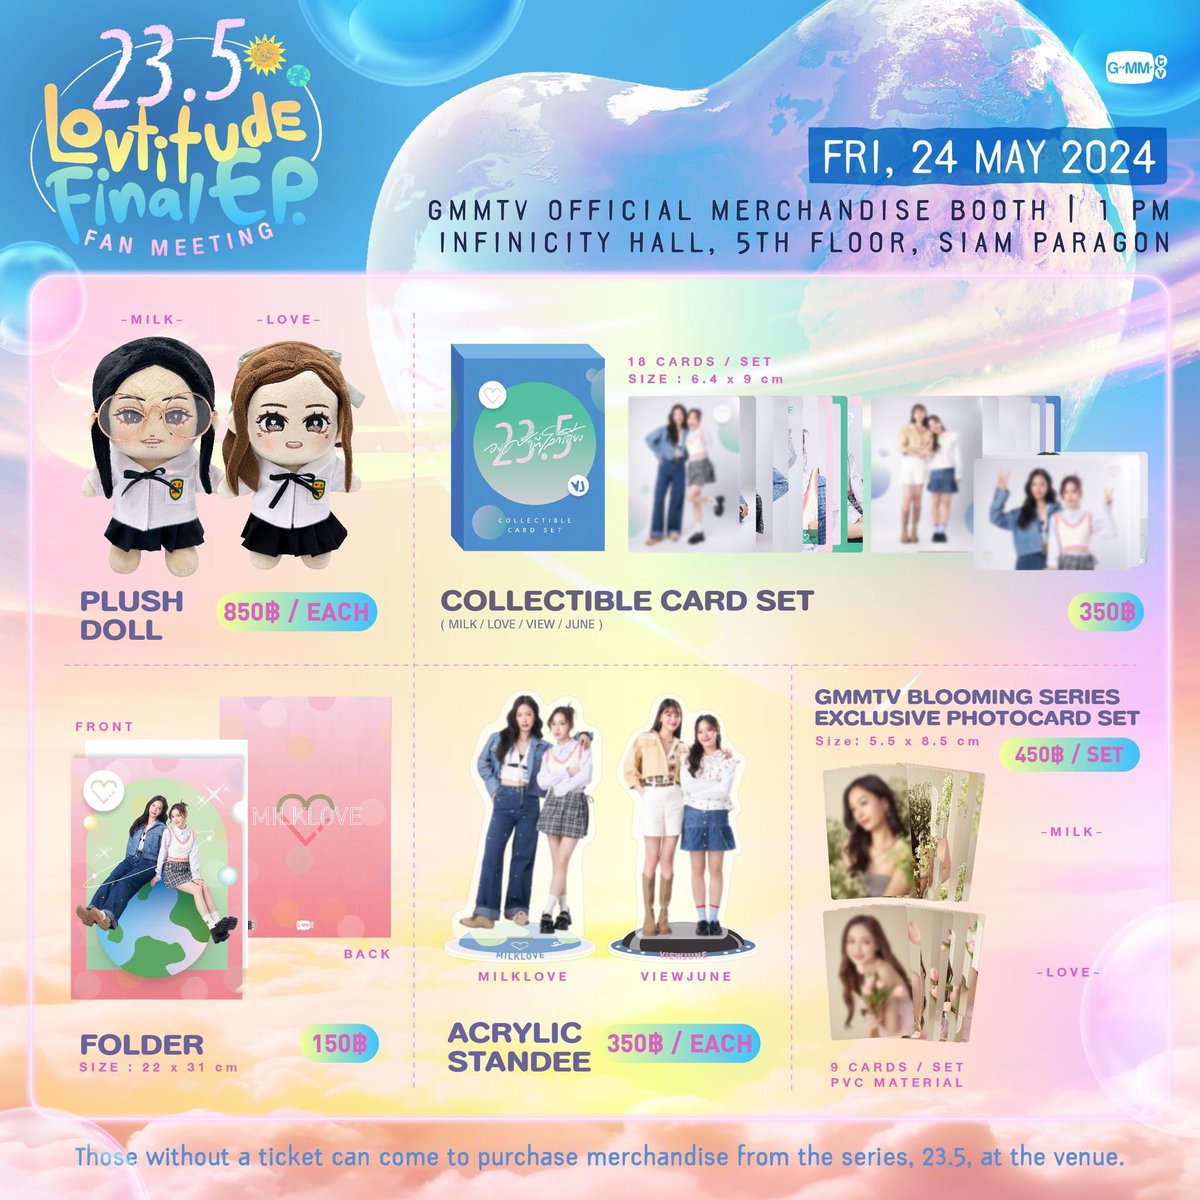 Get ready to shop 23.5 merchandise at the 23.5 Lovtitude Final EP. Fan Meeting event.

At GMMTV Official Merchandise Booth
24 May 2024
1 p.m. onwards
Infinicity Hall, 5th floor, Siam Paragon

#23point5
#GMMTV